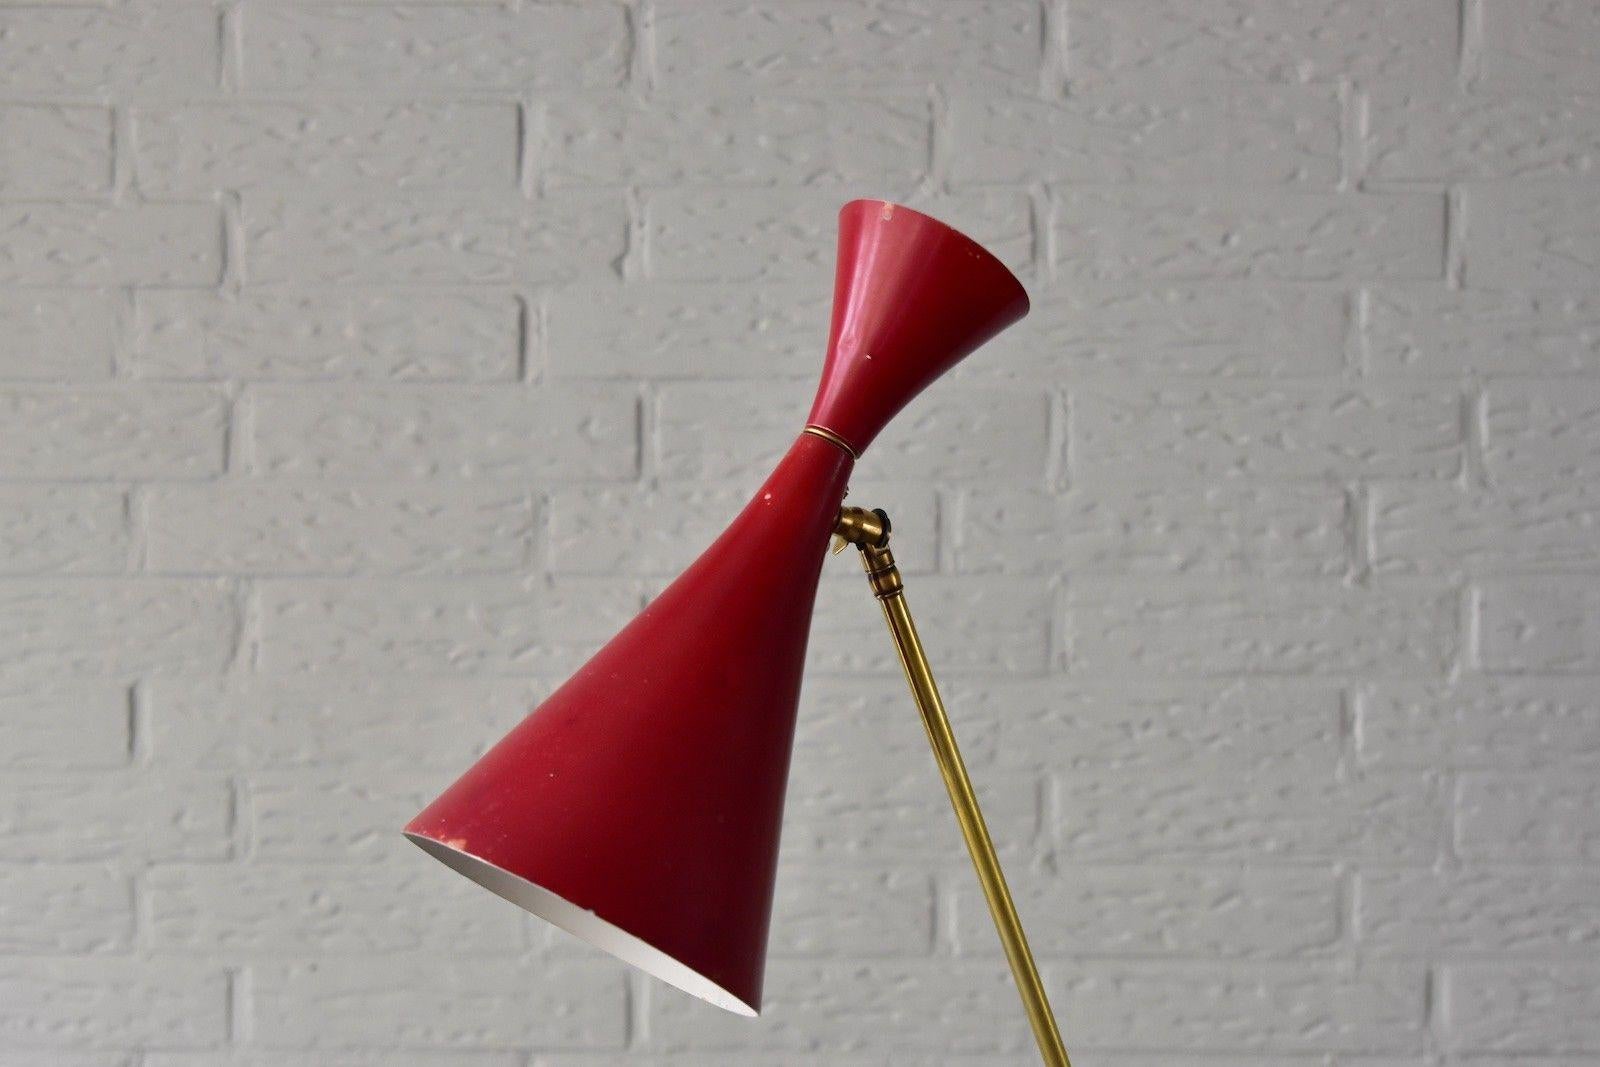 Nice vintage 1960s Fog & Mørup floor lamp. Original red colored shade with brass adjustable arm and heavy metal base. The brass items are polished, the black base is repaint. Shade in original color. Electric is redone with E26/27 Edison socket so